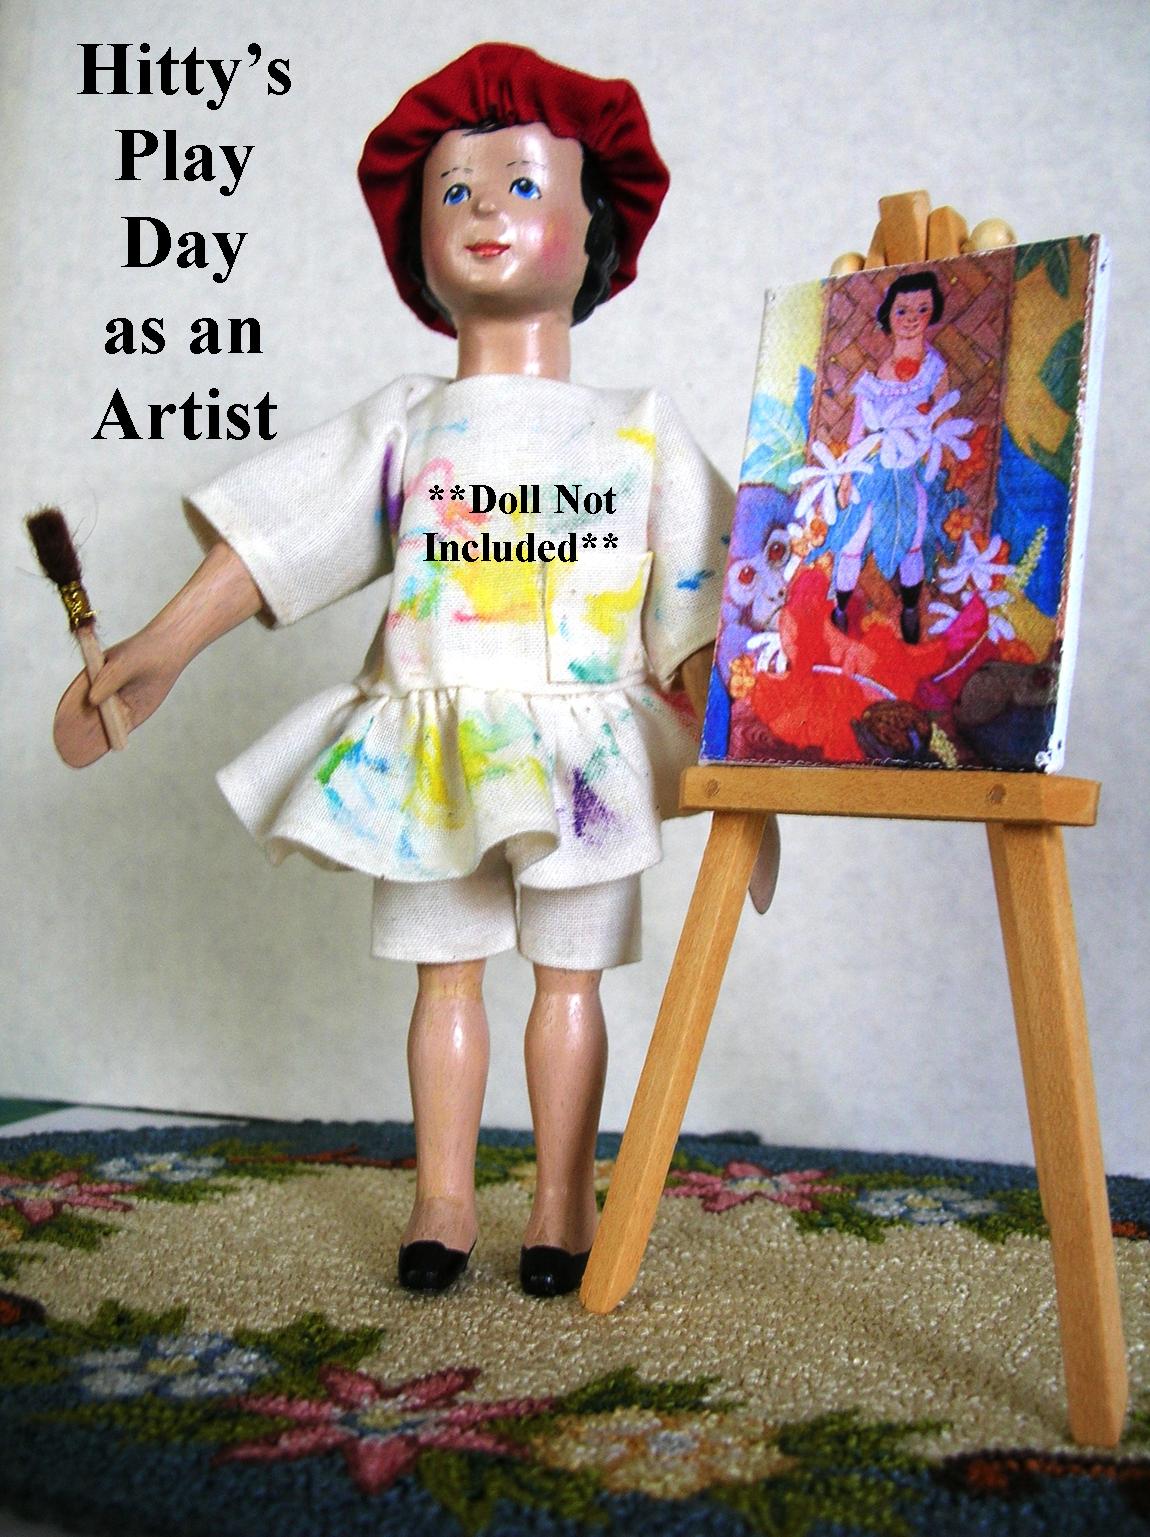 Hitty's Play Day as an Artist   •   Wednesday, August 3rd, 2:15 pm